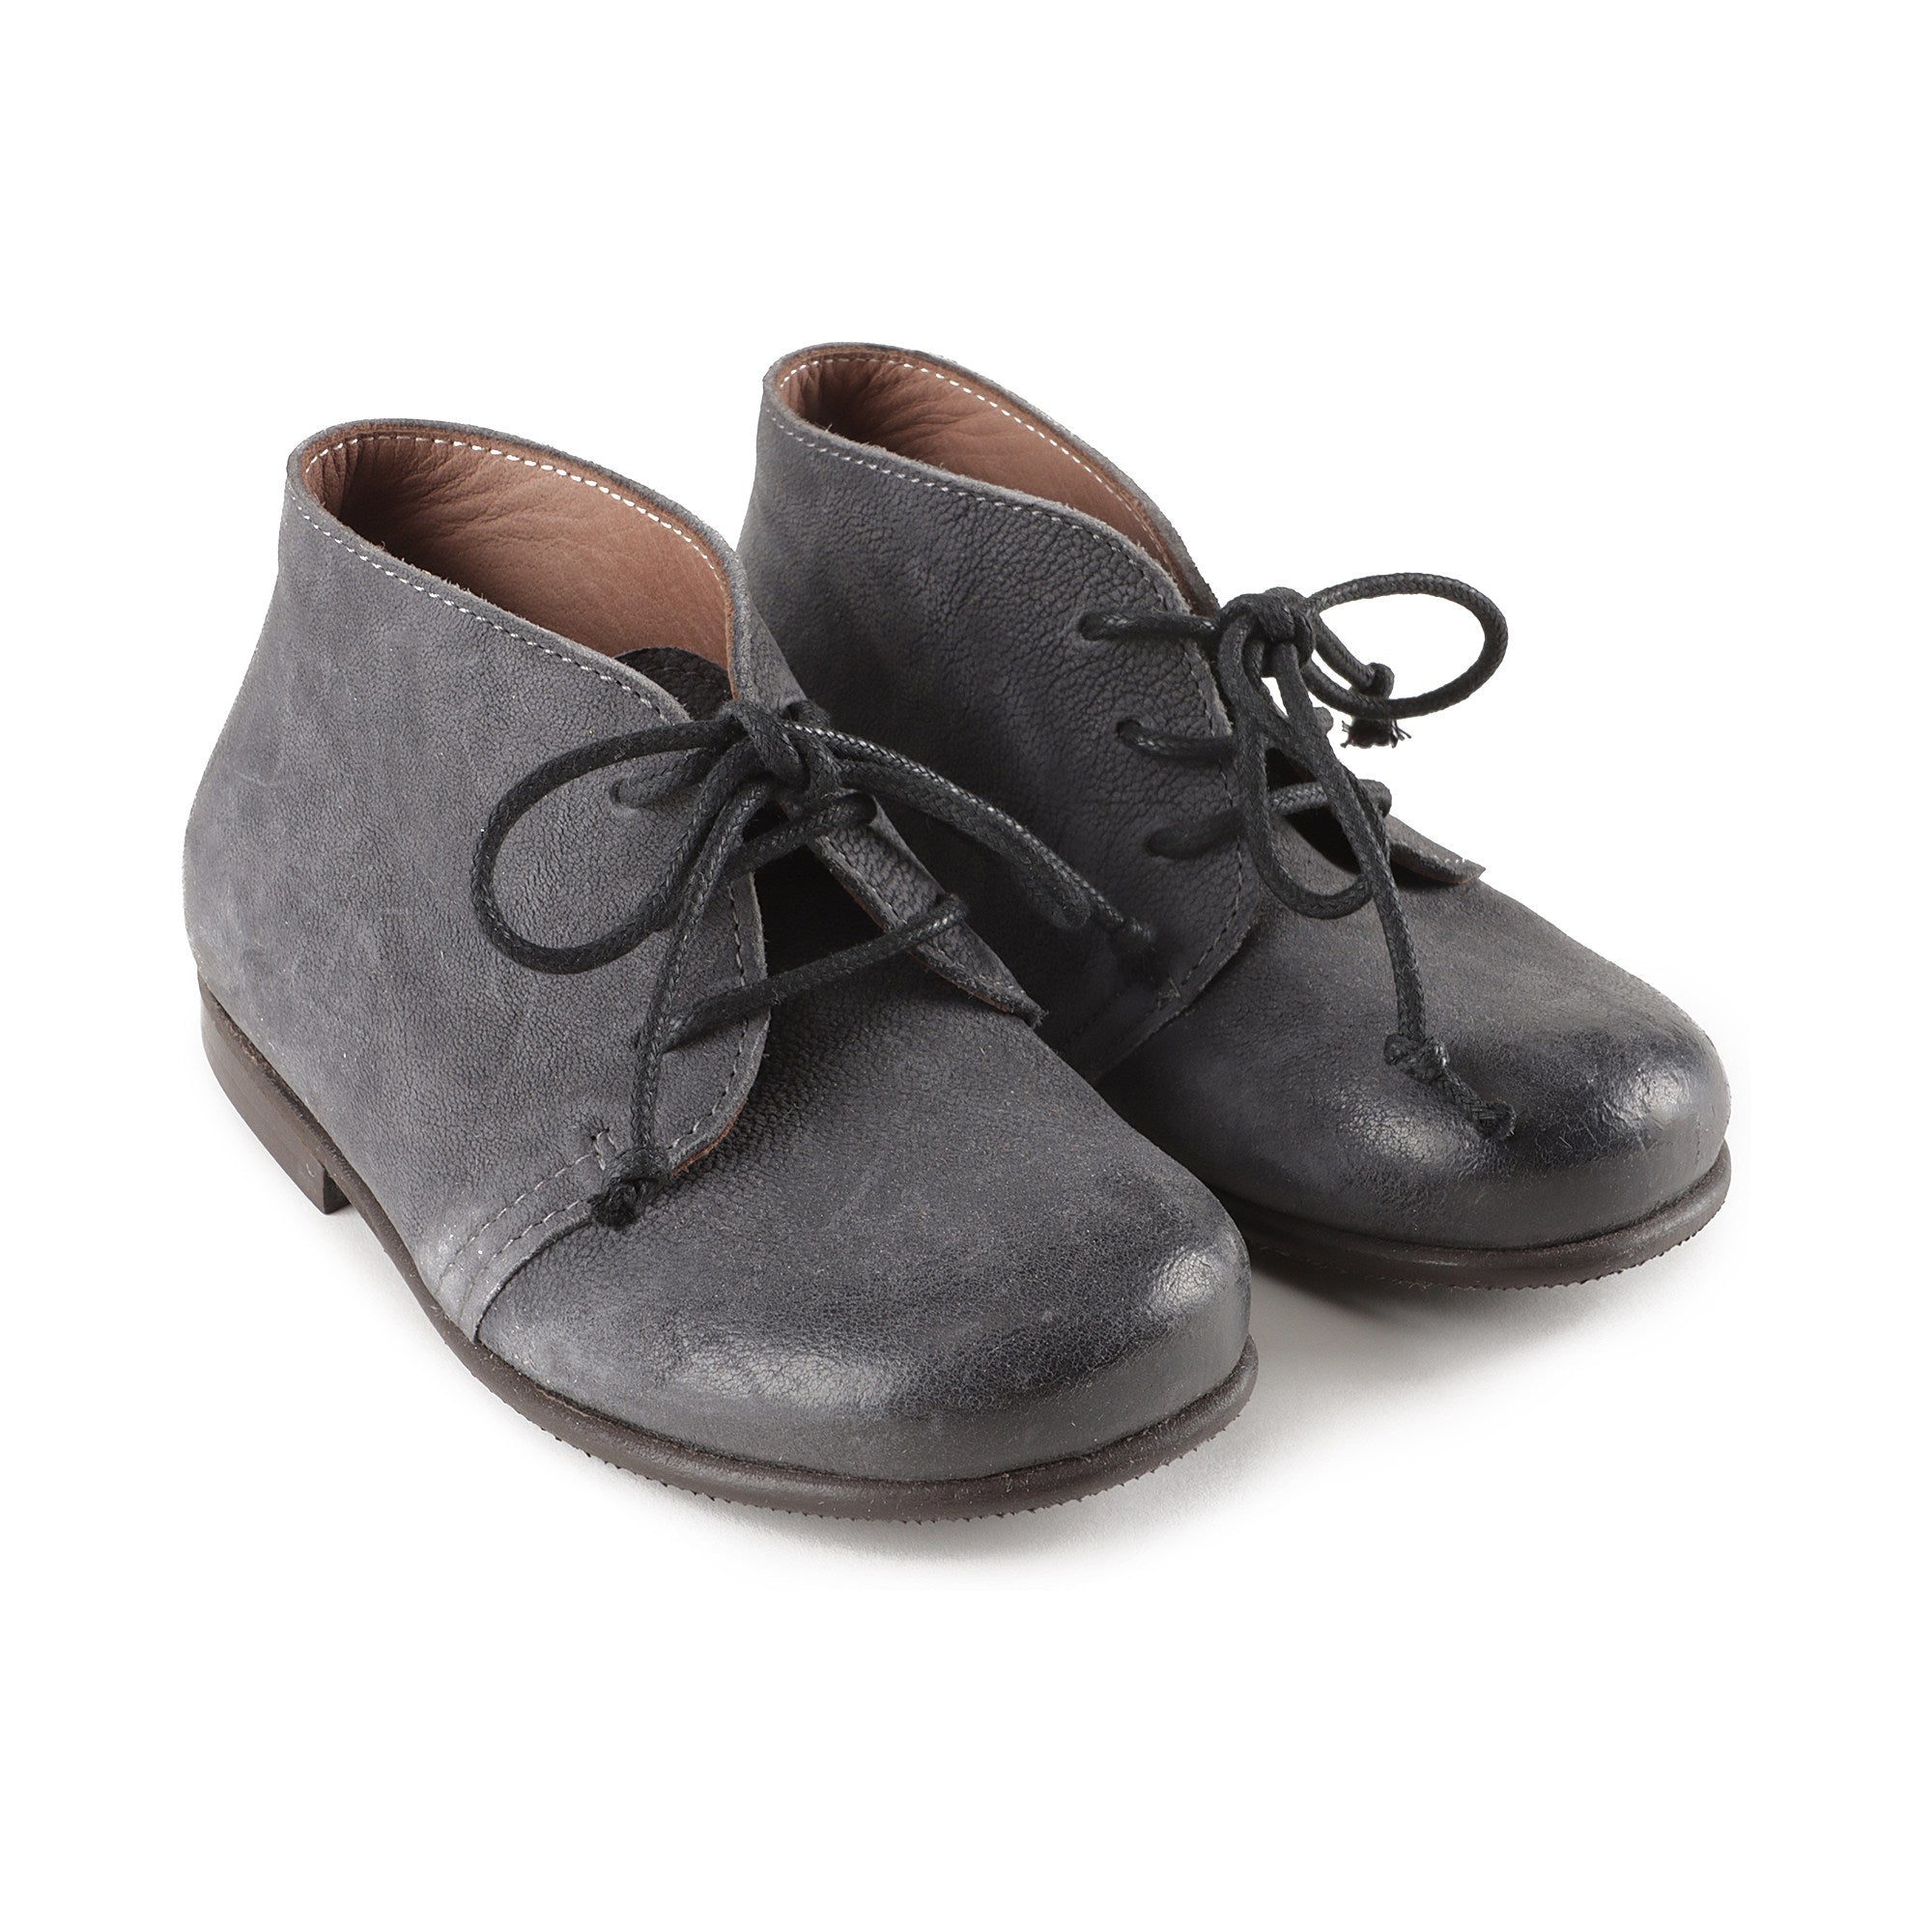 Boys & Girls Grey Leather Shoes